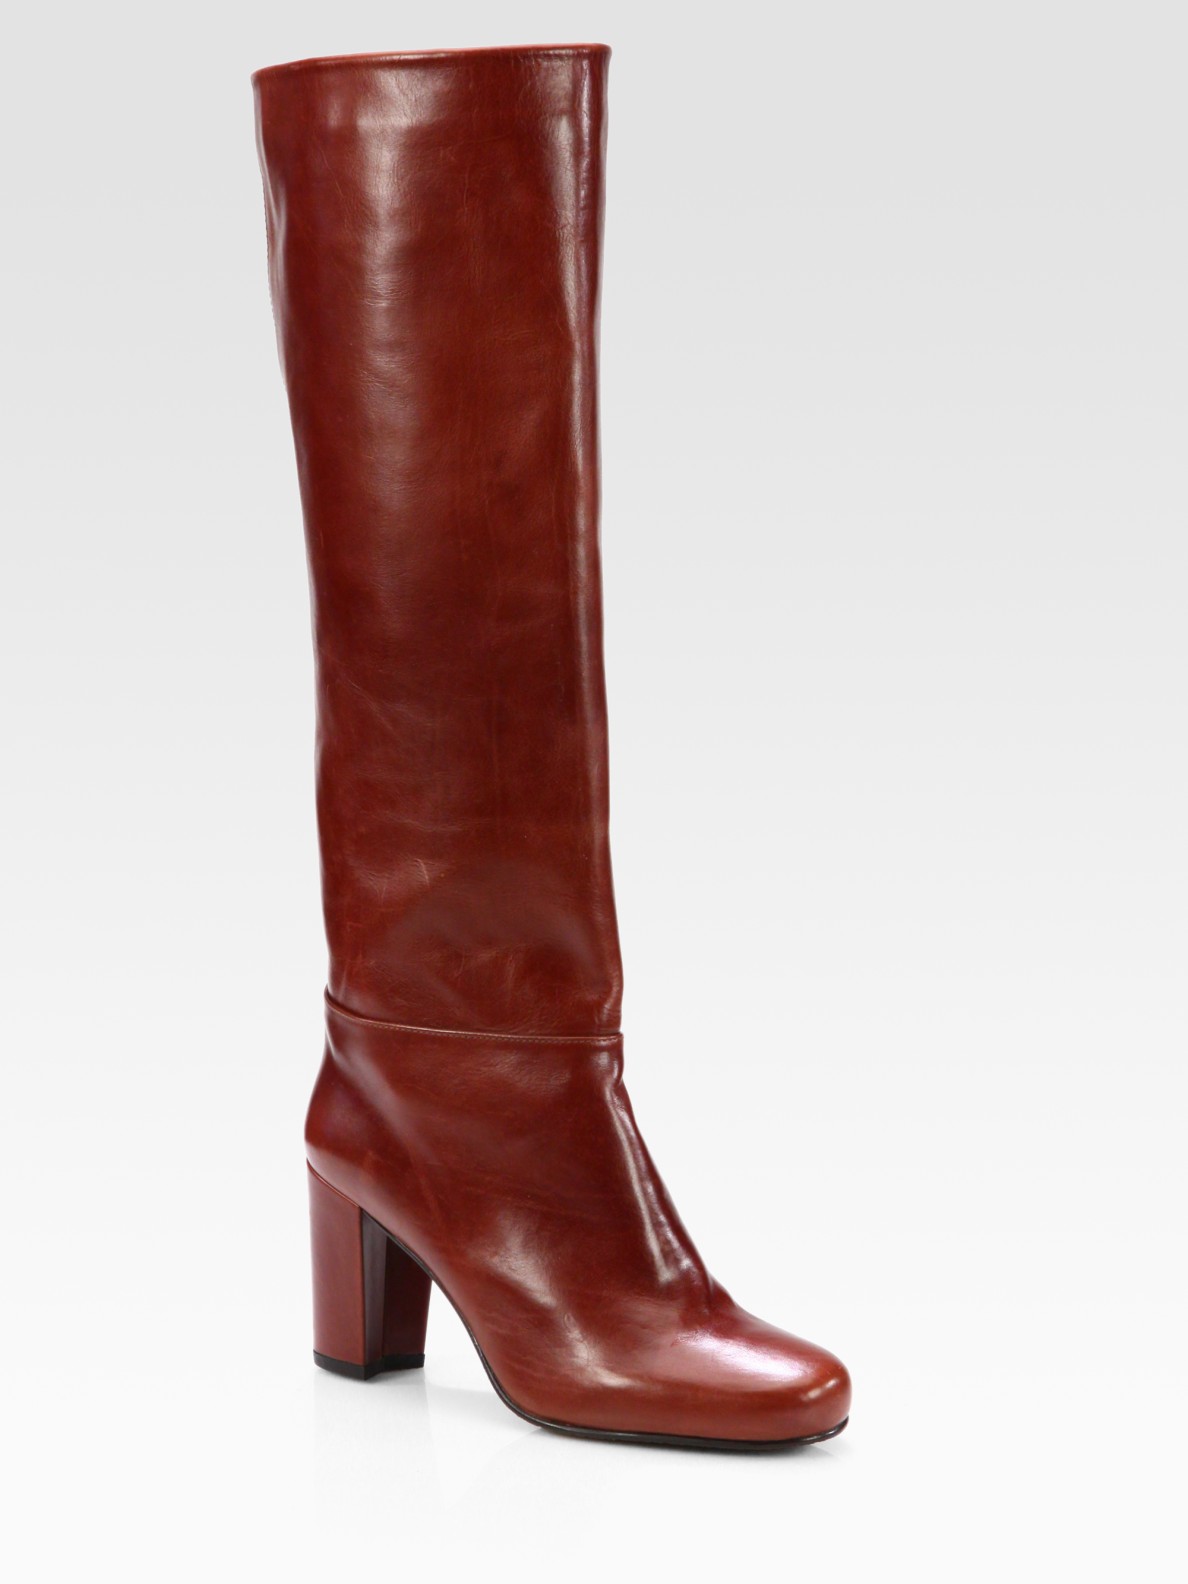 Stuart weitzman Toujours Leather Kneehigh Boots in Brown | Lyst